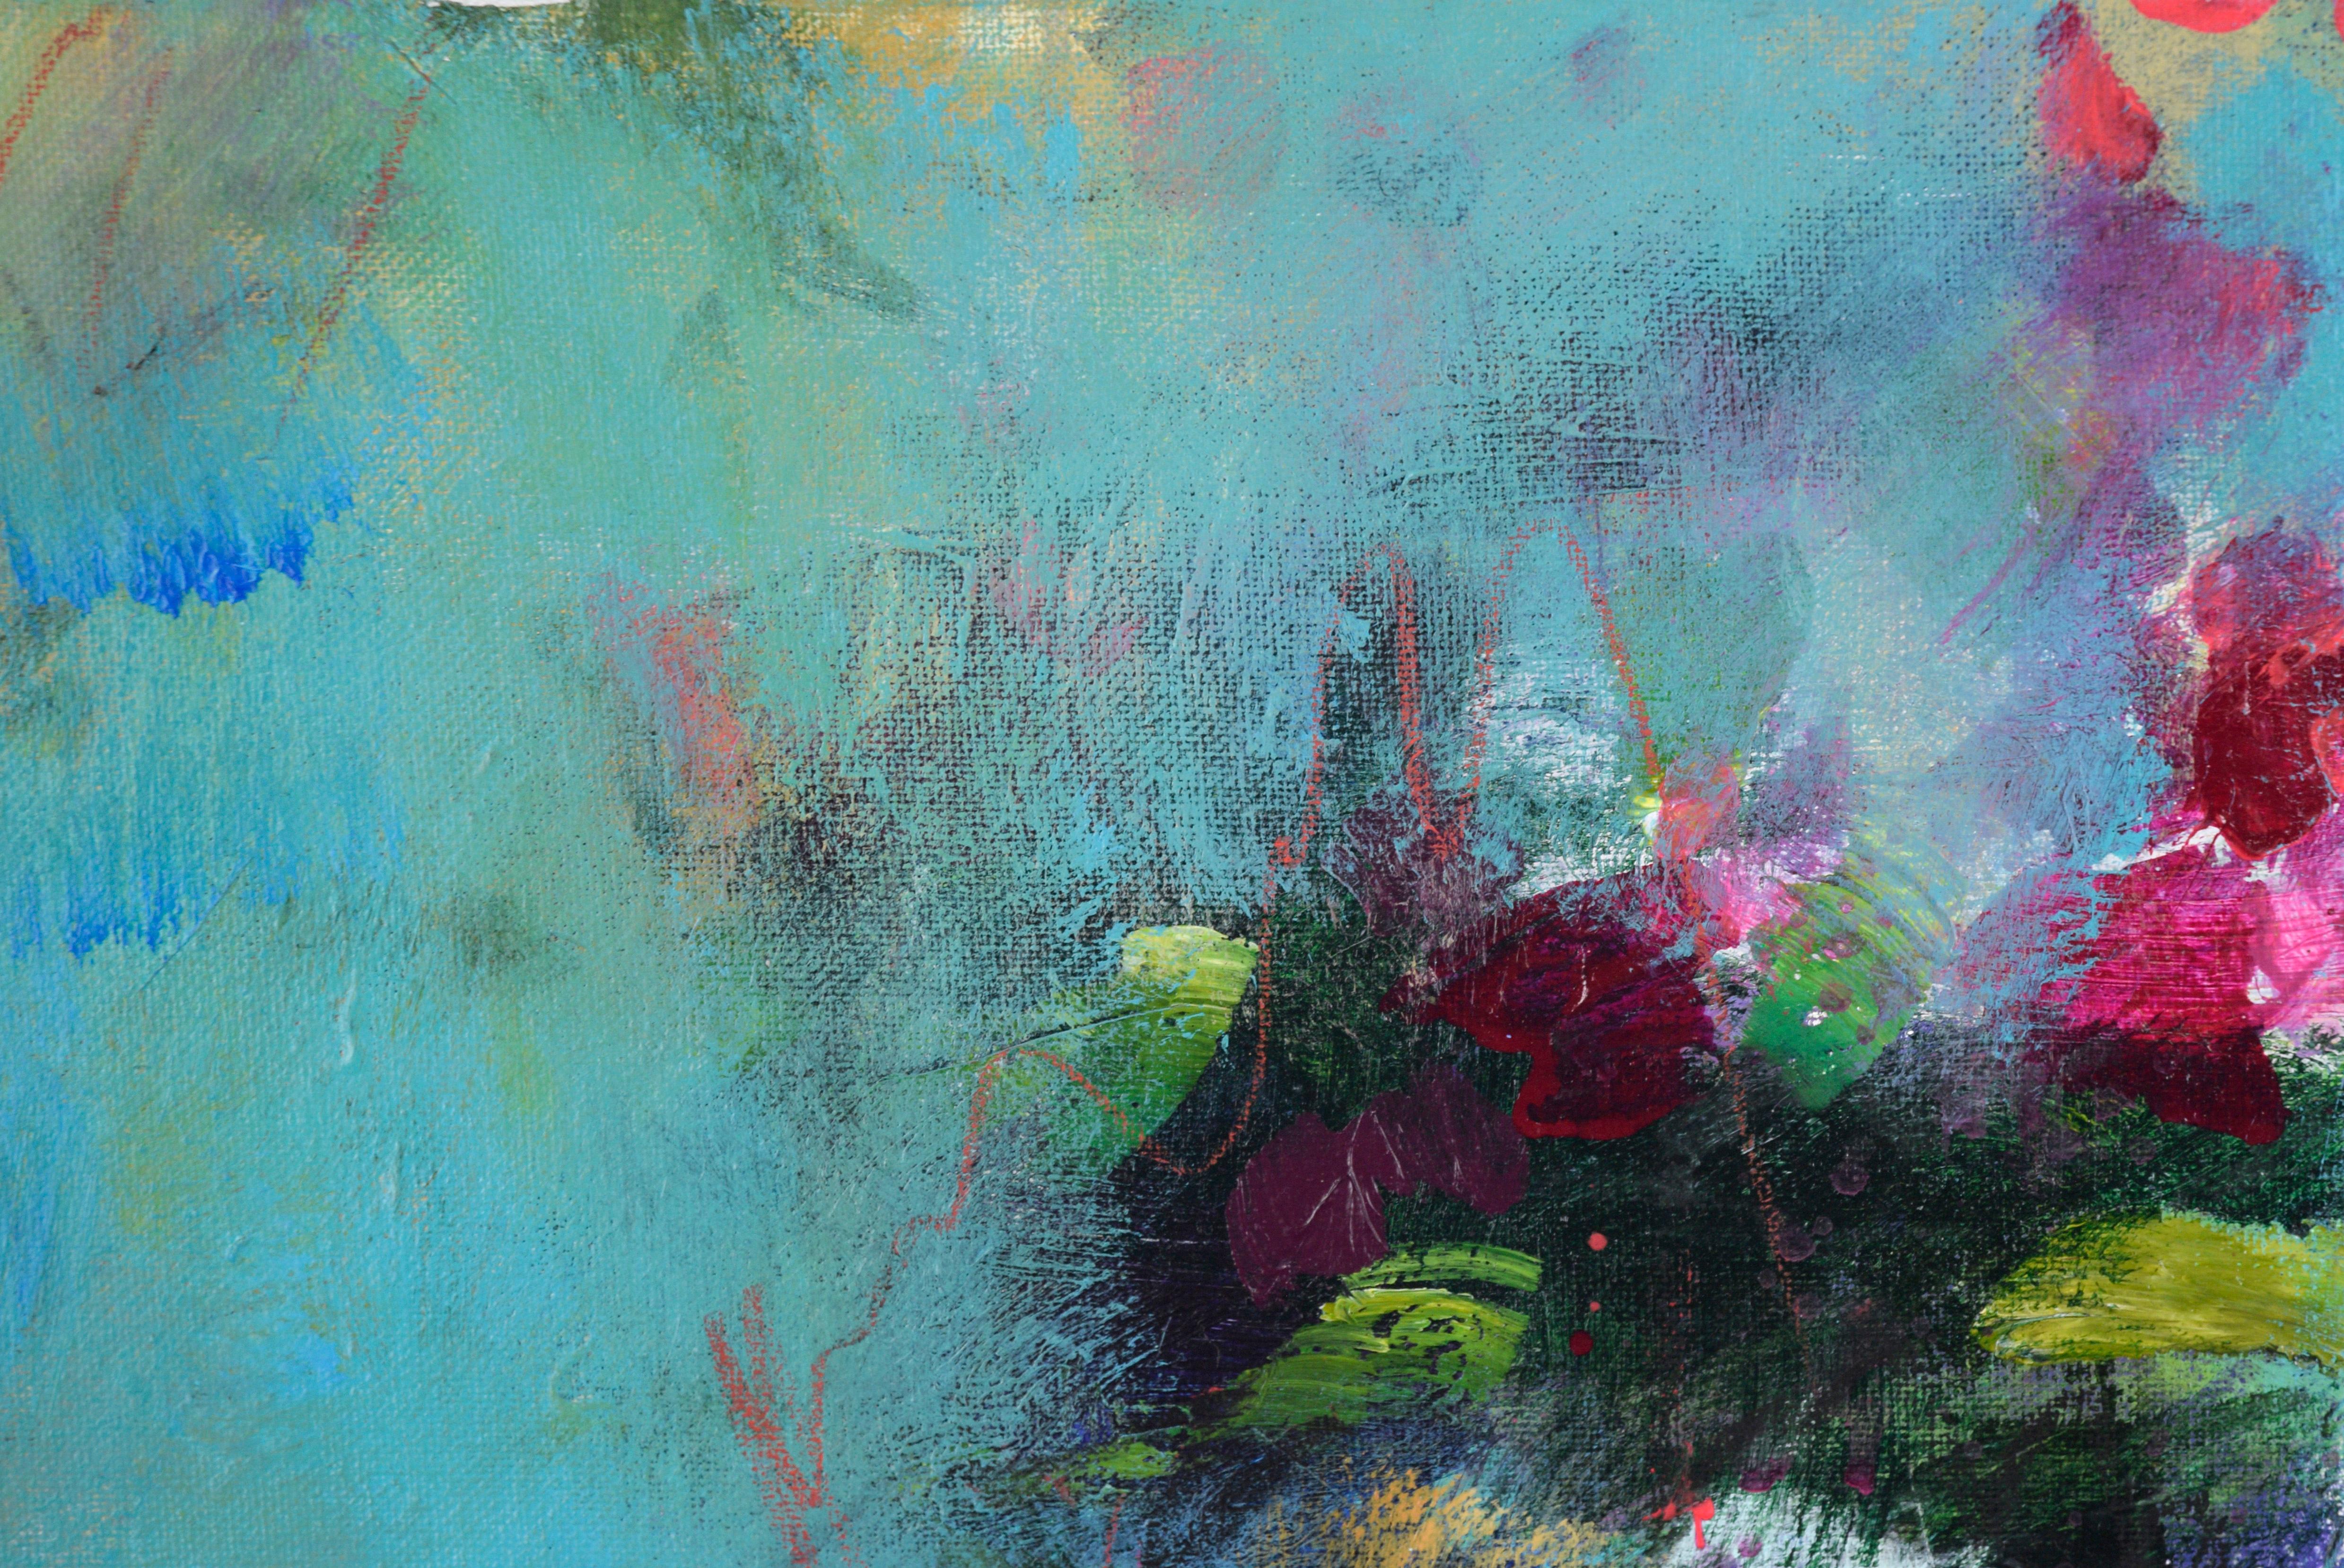 Abstracted Floral Still Life - Abstract Impressionist Painting by Ilana Ingber